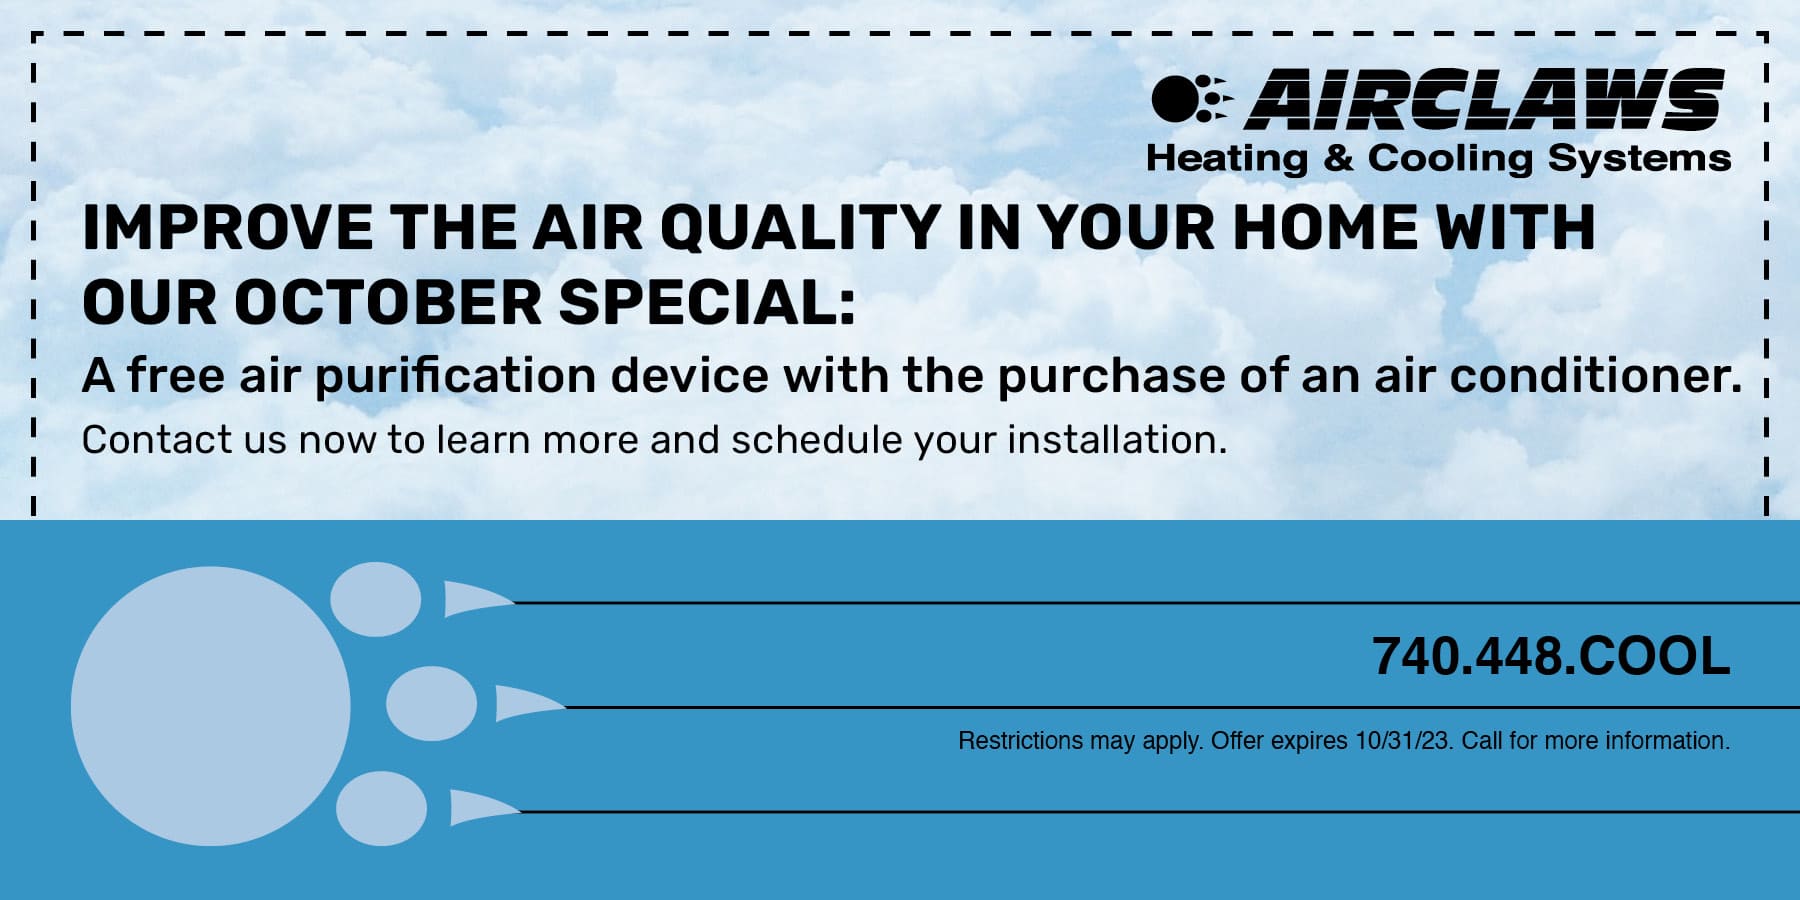 Airclaws October special for a free air purification device with the purchase of an air conditioner.